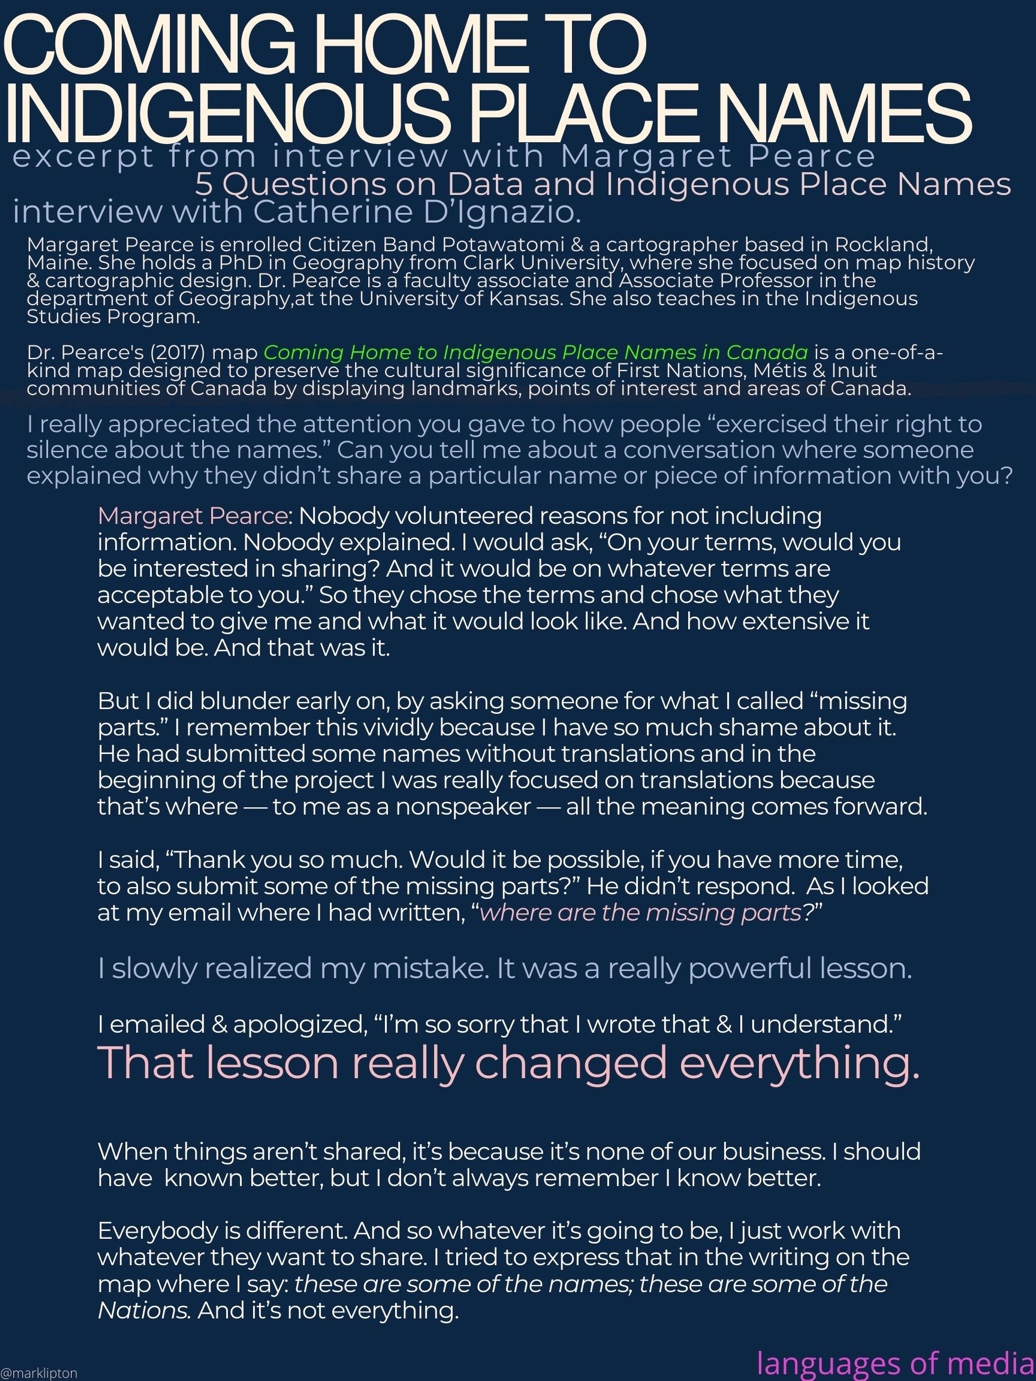 image: Coming Home to Indigenous Place Names in Canada, excerpt from interview with Margaret Pearce. 5 Questions on Data and Indigenous Place Names, interview with Catherine D’Ignazio. Margaret Pearce is enrolled Citizen Band Potawatomi & a cartographer based in Rockland, Maine. She holds a PhD in Geography from Clark University, where she focused on map history & cartographic design. Dr. Pearce is a faculty associate and Associate Professor in the department of Geography at the University of Kansas. She also teaches in the Indigenous Studies Program. Dr. Pearce's (2017) map Coming Home to Indigenous Place Names in Canada is a one-of-a-kind map designed to preserve the cultural significance of First Nations, Métis & Inuit communities of Canada by displaying landmarks, points of interest and areas of Canada. I really appreciated the attention you gave to how people “exercised their right to silence about the names.” Can you tell me about a conversation where someone explained why they didn’t share a particular name or piece of information with you? Margaret Pearce: Nobody volunteered reasons for not including information. Nobody explained. I would ask, “On your terms, would you be interested in sharing? And it would be on whatever terms are acceptable to you.” So they chose the terms and chose what they wanted to give me and what it would look like. And how extensive it would be. And that was it. But I did blunder early on, by asking someone for what I called “missing parts.” I remember this vividly because I have so much shame about it. He had submitted some names without translations and in the beginning of the project I was really focused on translations because that’s where — to me as a nonspeaker — all the meaning comes forward. I said, “Thank you so much. Would it be possible, if you have more time, to also submit some of the missing parts?” He didn’t respond. As I looked at my email where I had written, “where are the missing parts?” I slowly realized my mistake. It was a really powerful lesson. I emailed & apologized, “I’m so sorry that I wrote that & I understand.” That lesson really changed everything. When things aren’t shared, it’s because it’s none of our business. I should have known better, but I don’t always remember I know better. Everybody is different. And so whatever it’s going to be, I just work with whatever they want to share. I tried to express that in the writing on the map where I say: these are some of the names; these are some of the Nations. And it’s not everything.]